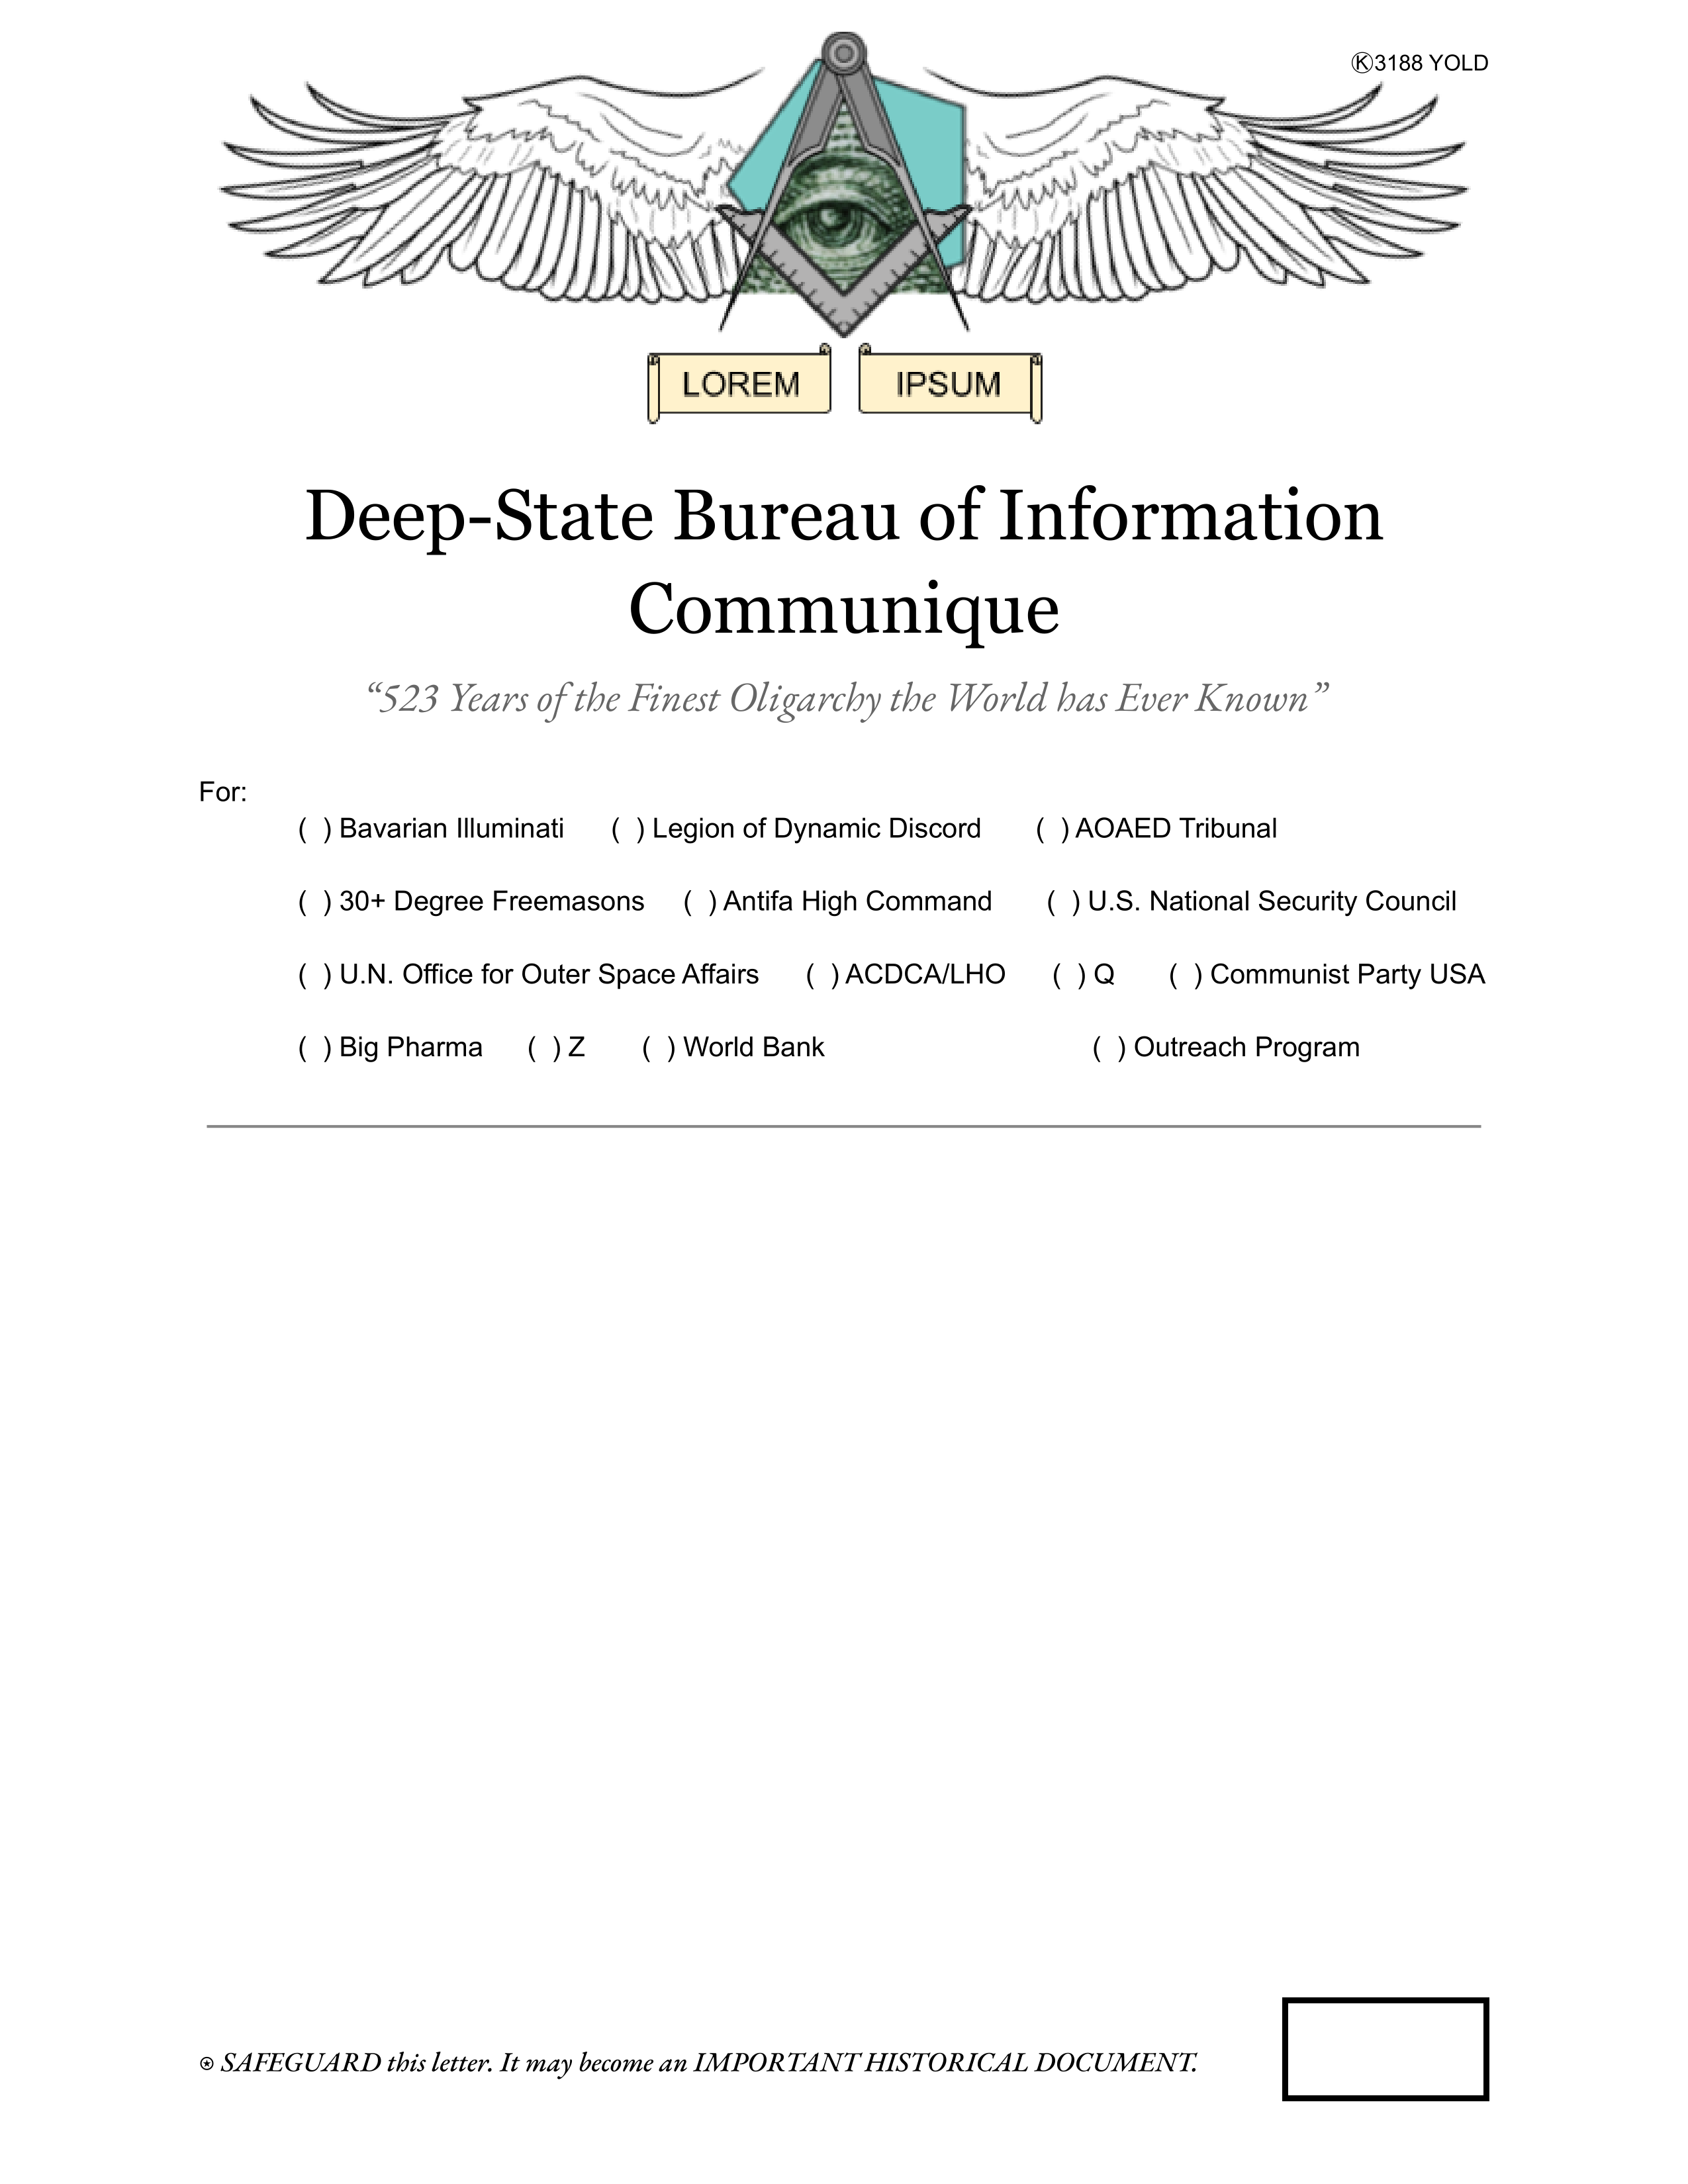 Deep-State Template.png